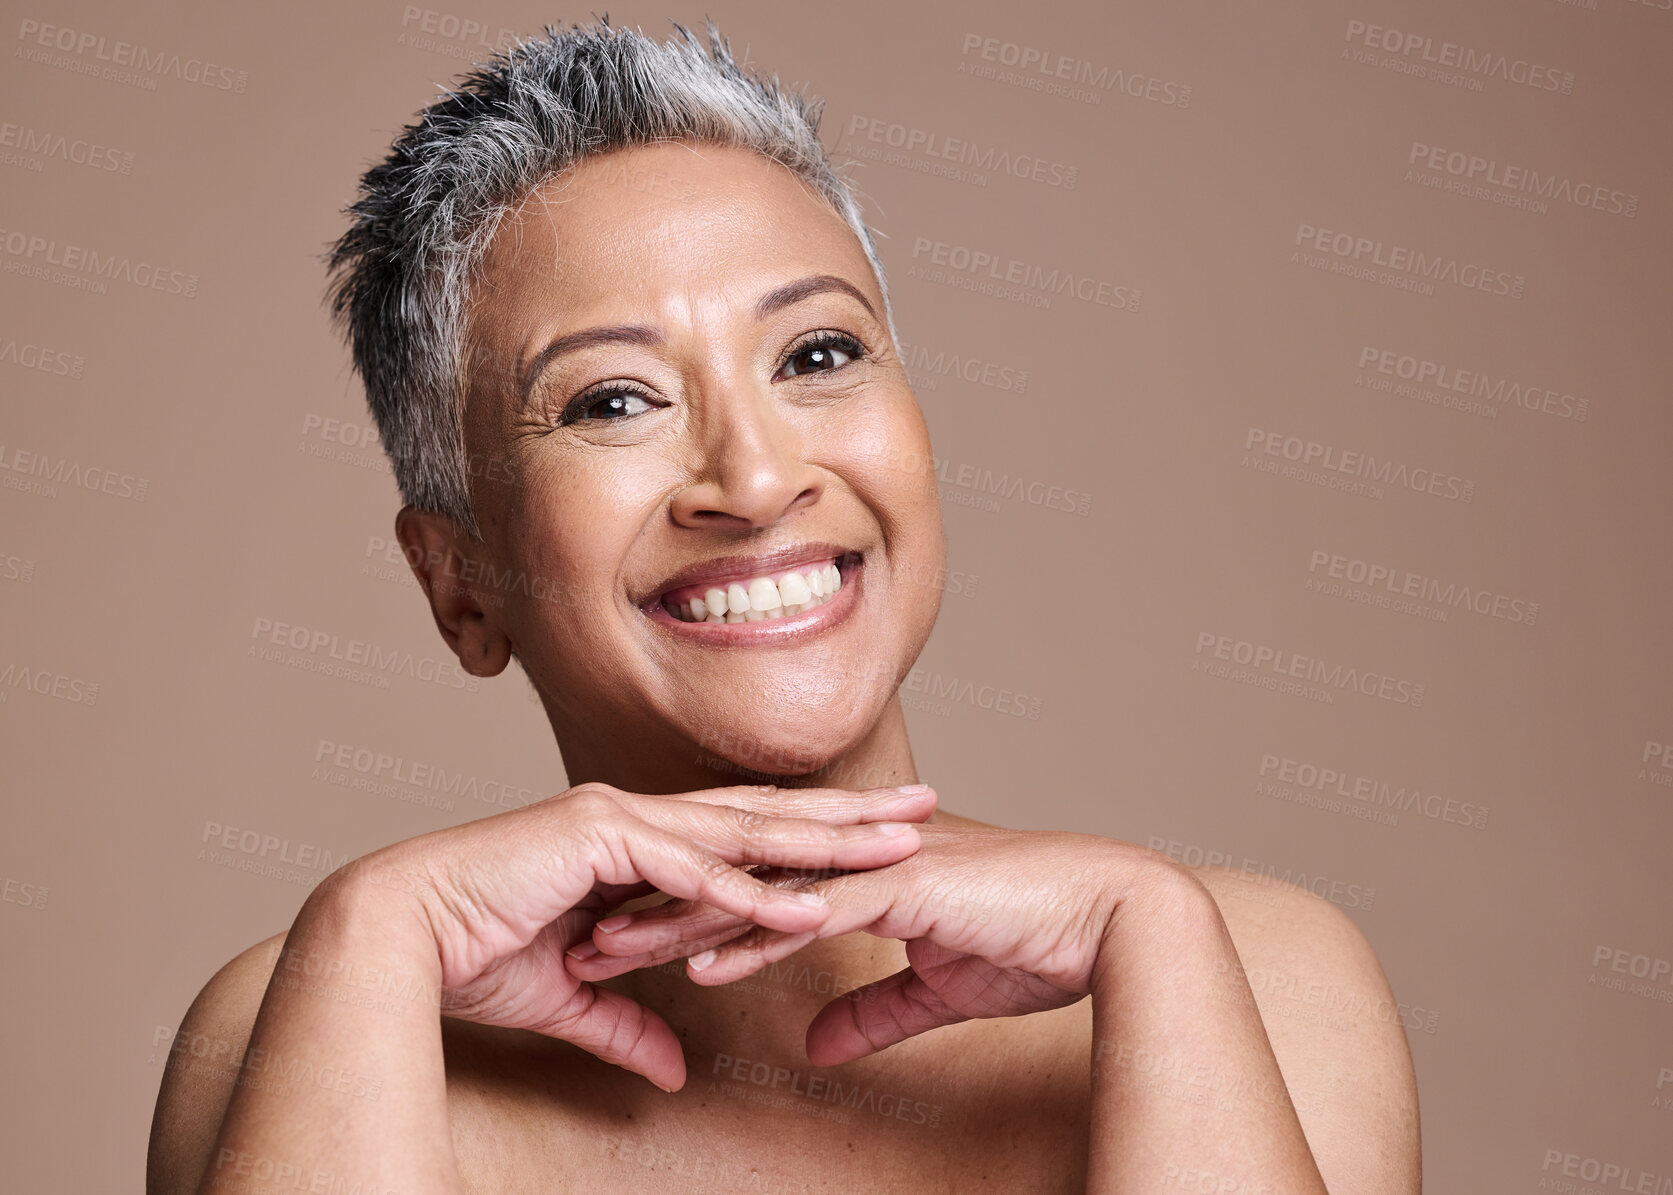 Buy stock photo Black woman, skincare and face of senior advertising cosmetics, makeup and dermatology facial product mockup with a smile. Face portrait of a mature model happy about self care, wellness and skin